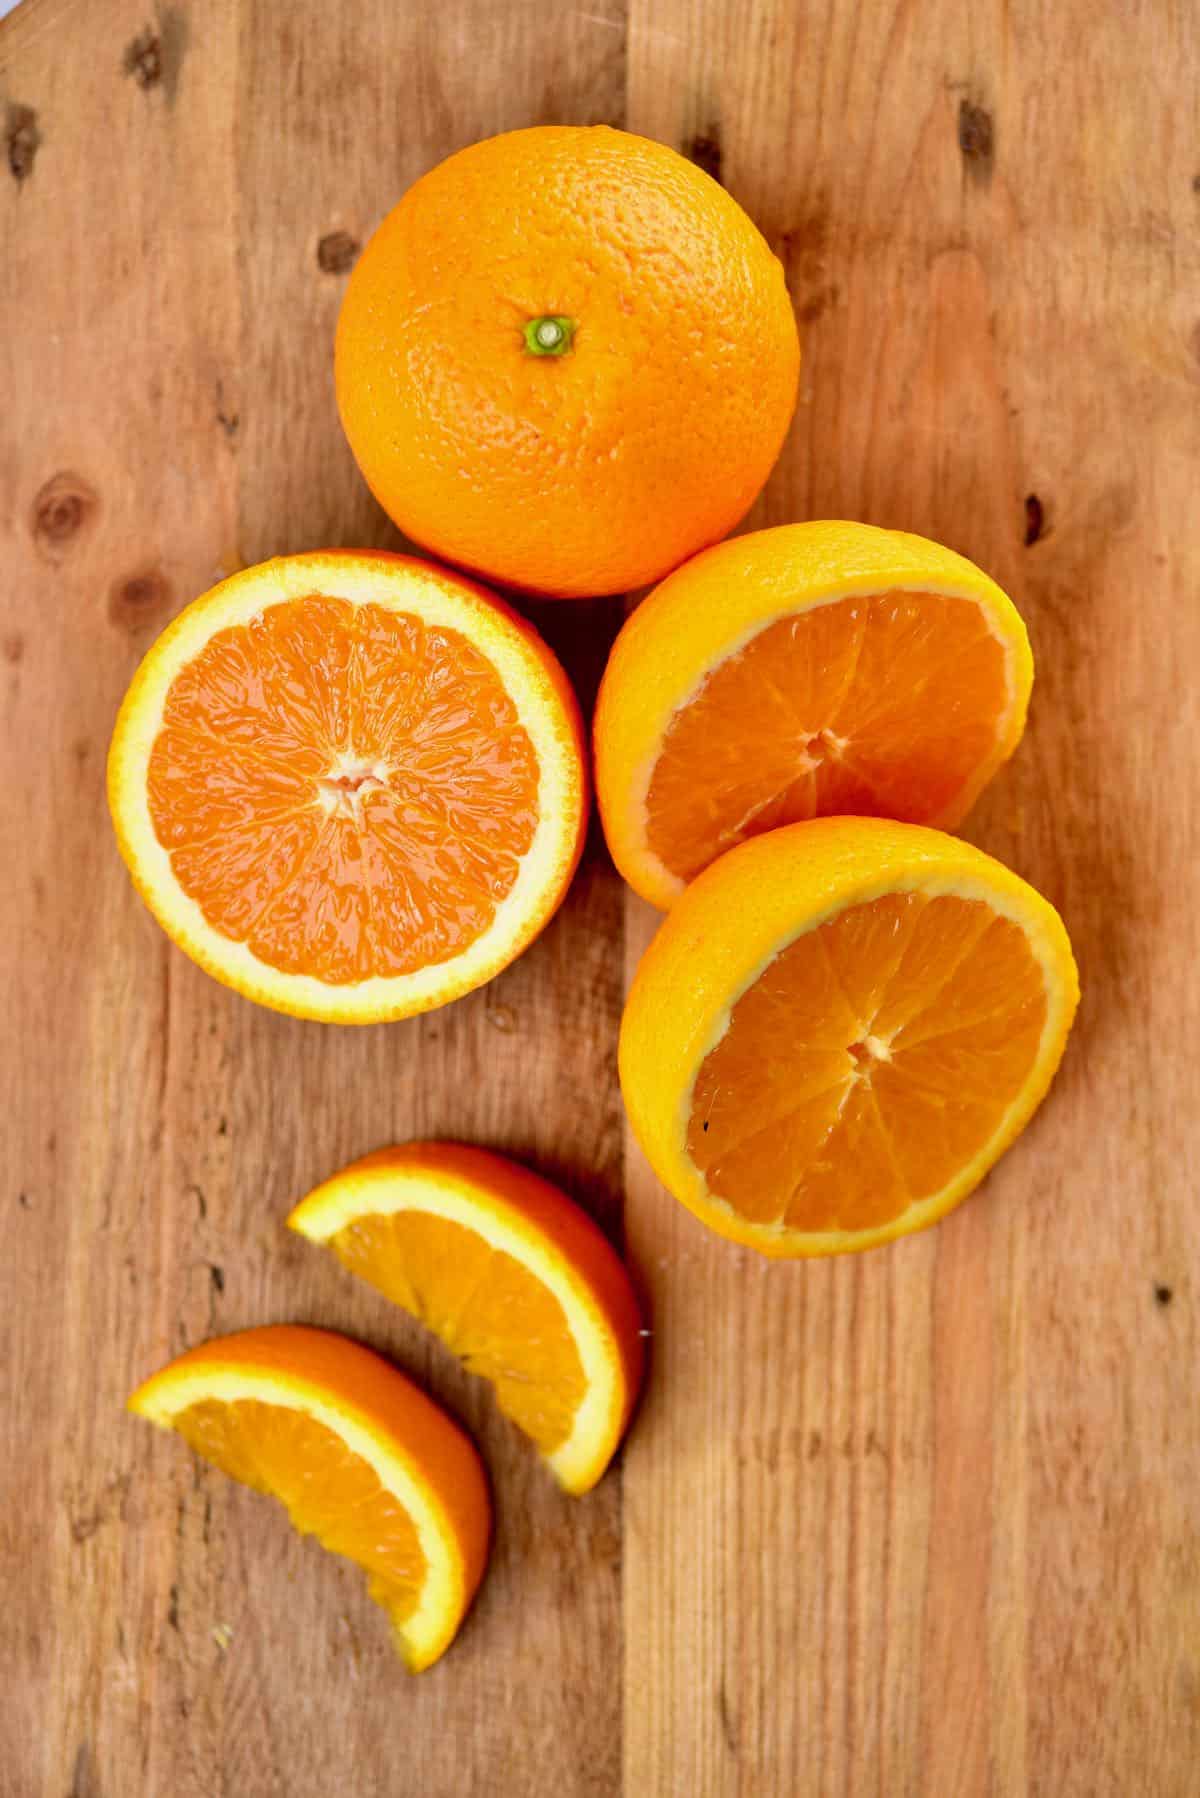 A whole orange and an orange cut into several pieces